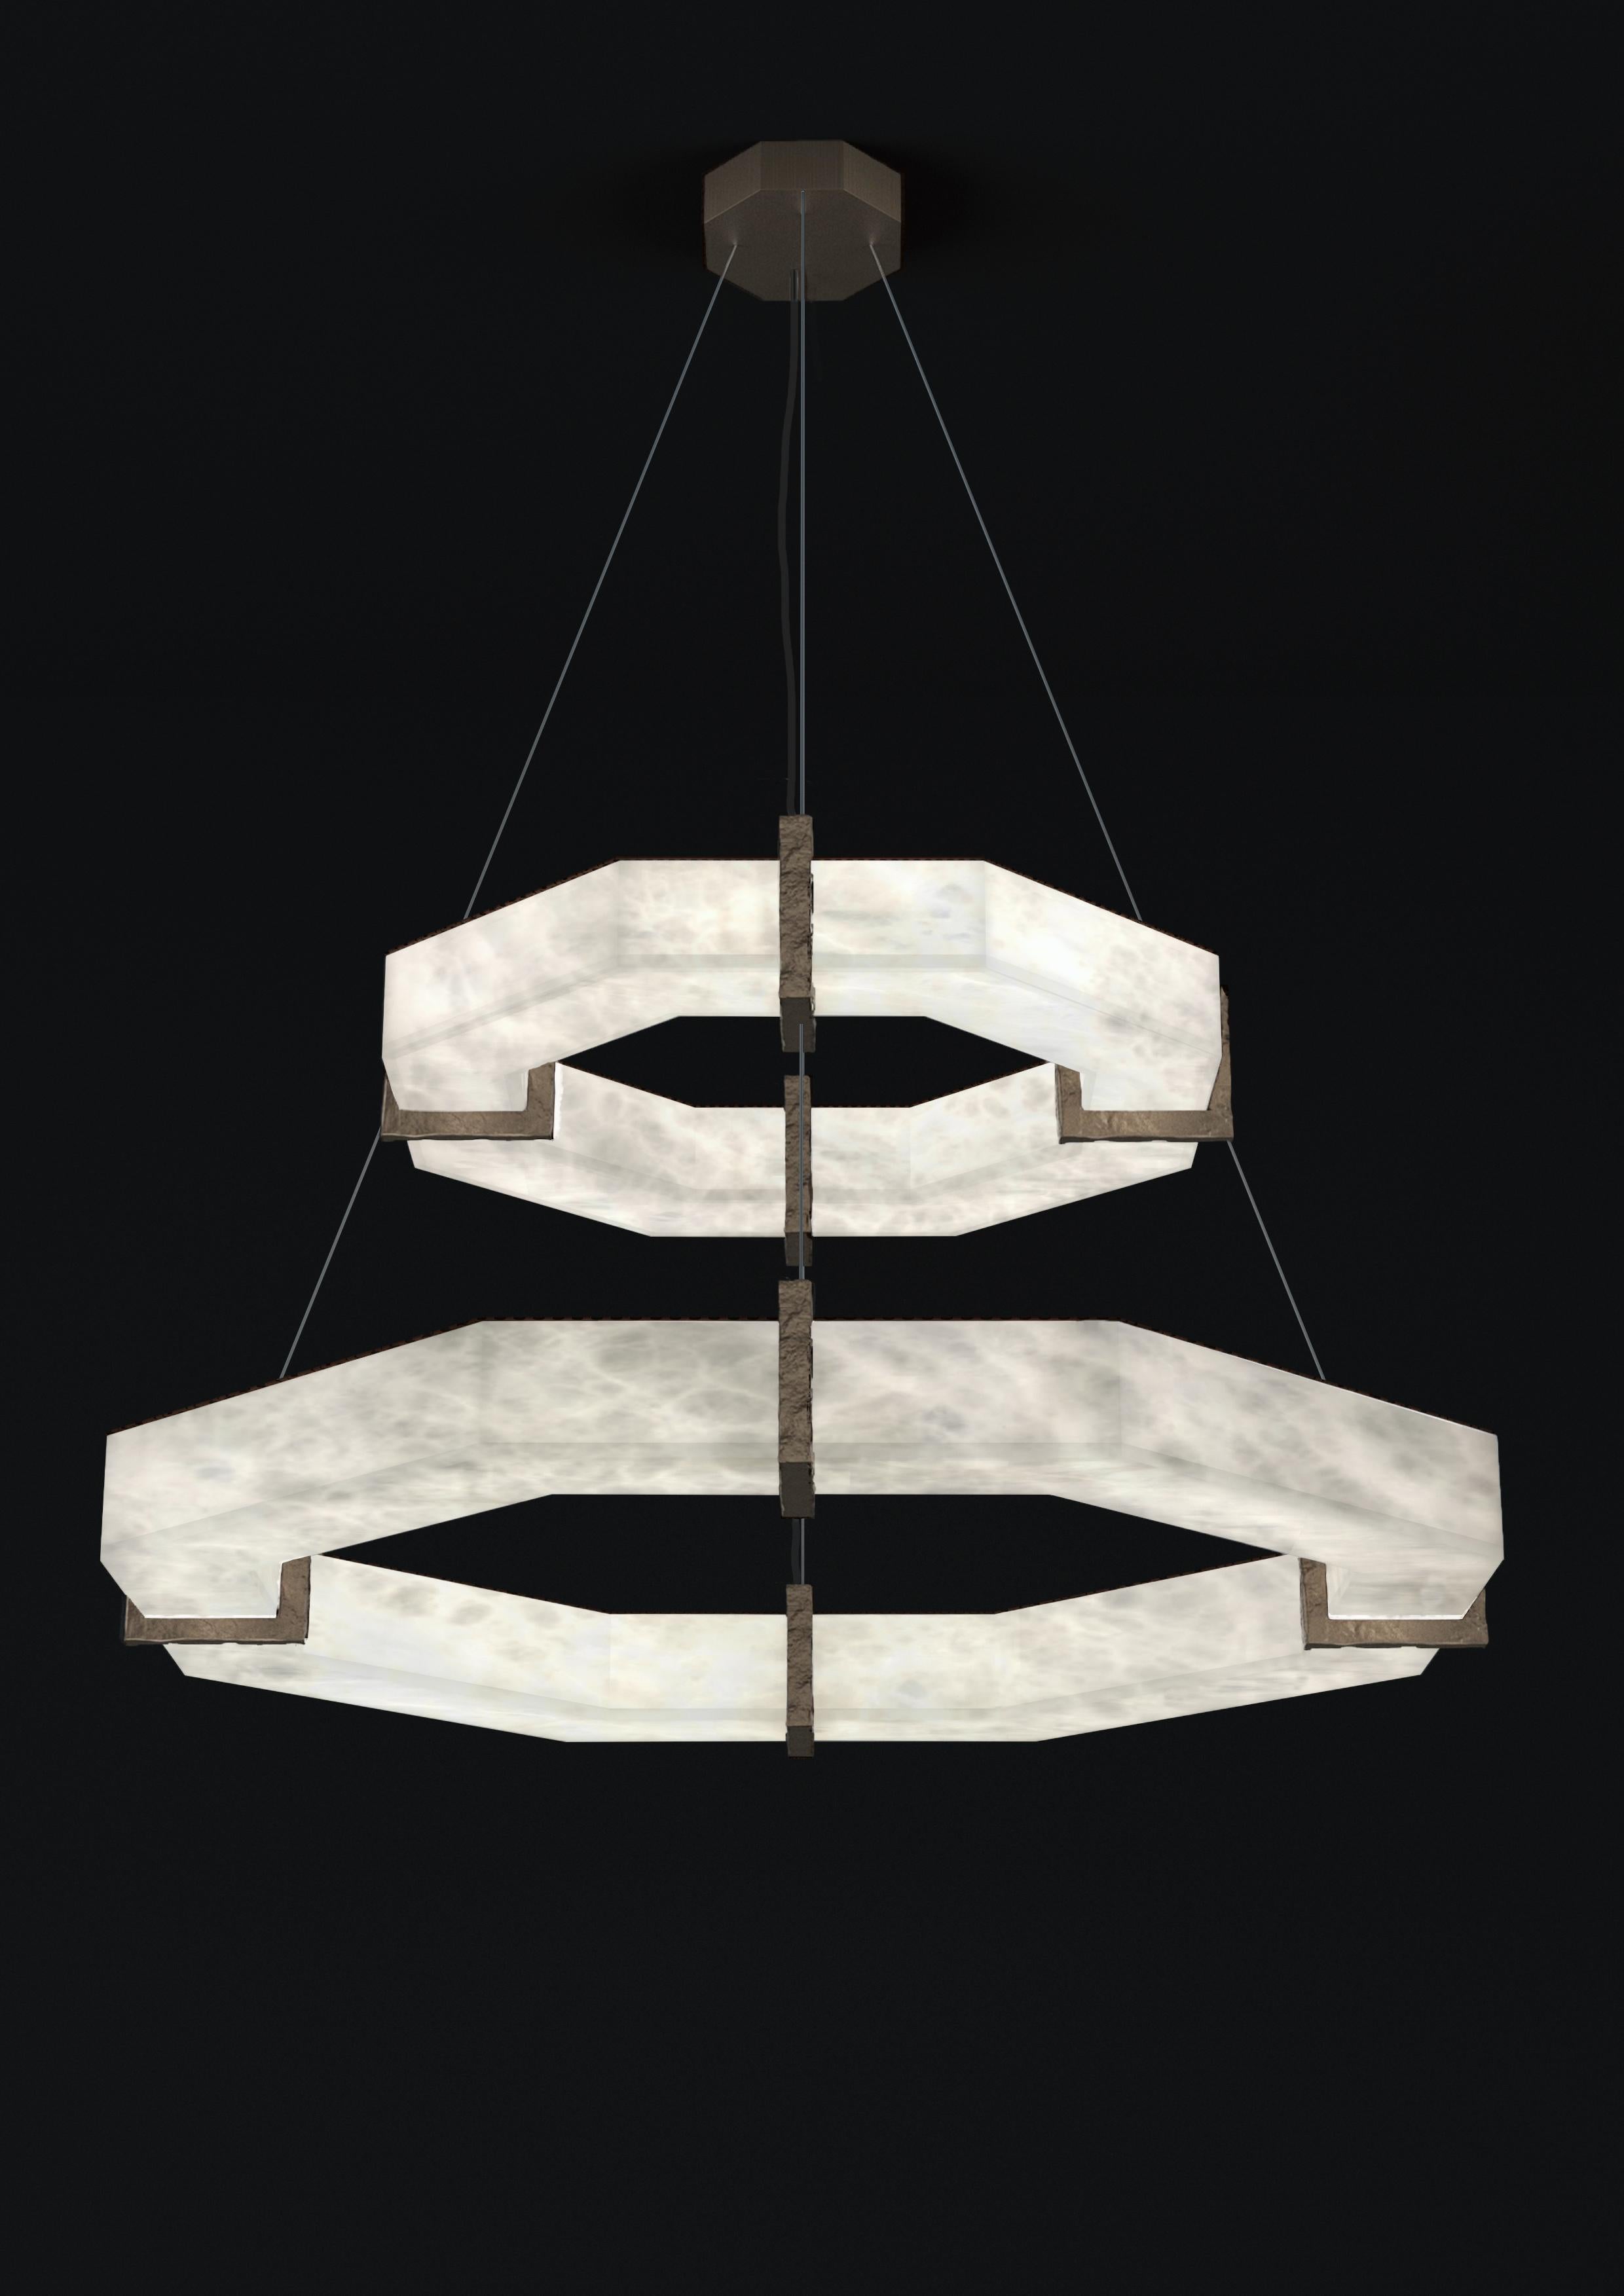 Efesto Brushed Burnished Metal Double Pendant Lamp by Alabastro Italiano
Dimensions: D 80.5 x W 80.5 x H 36.5 cm.
Materials: White alabaster and metal.

Available in different finishes: Shiny Silver, Bronze, Brushed Brass, Ruggine of Florence,